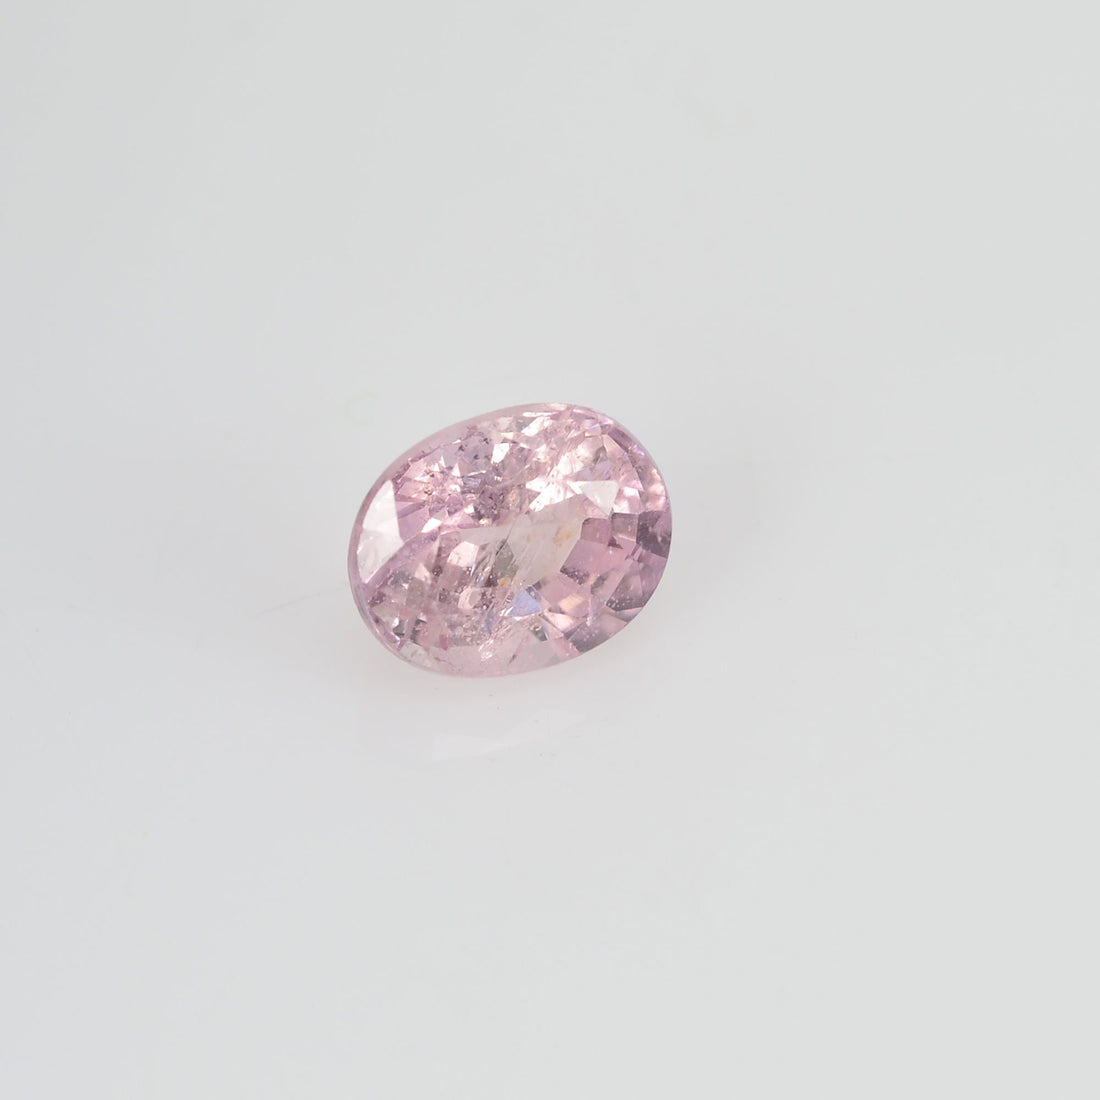 0.85 cts Natural Fancy Pink Sapphire Loose Gemstone oval Cut